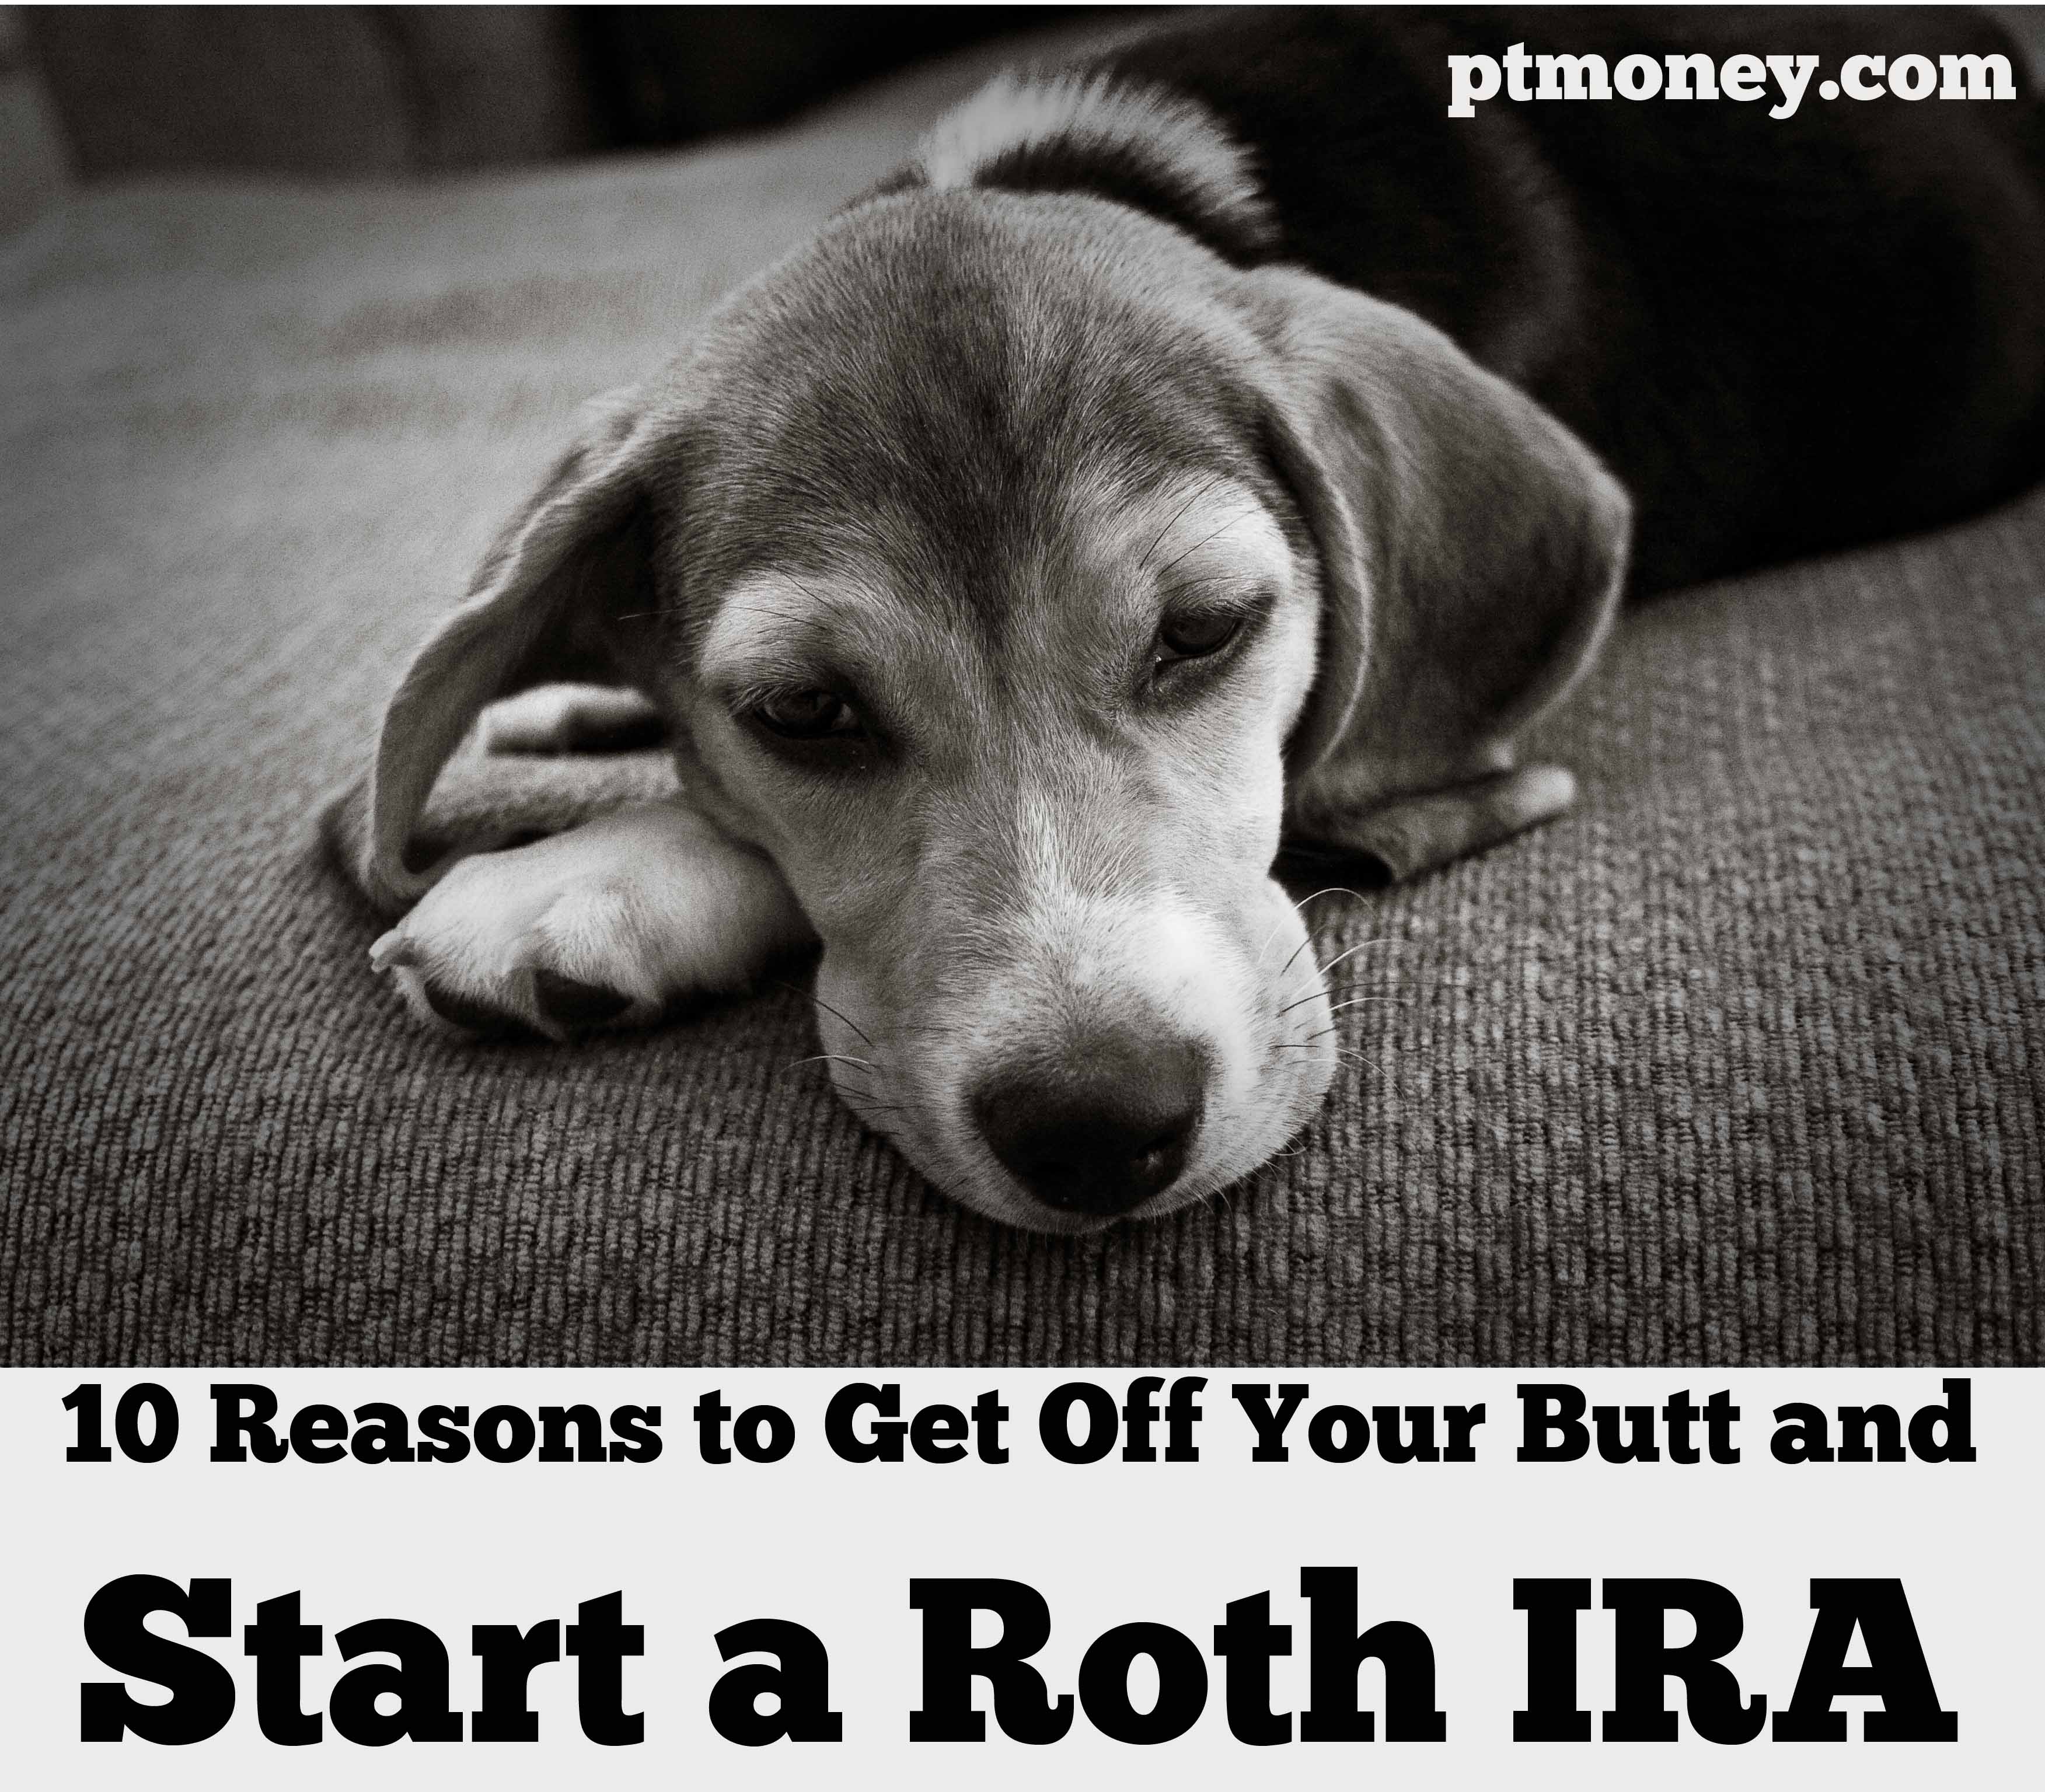 10 Reasons to Get Off Your Butt and Start a Roth IRA